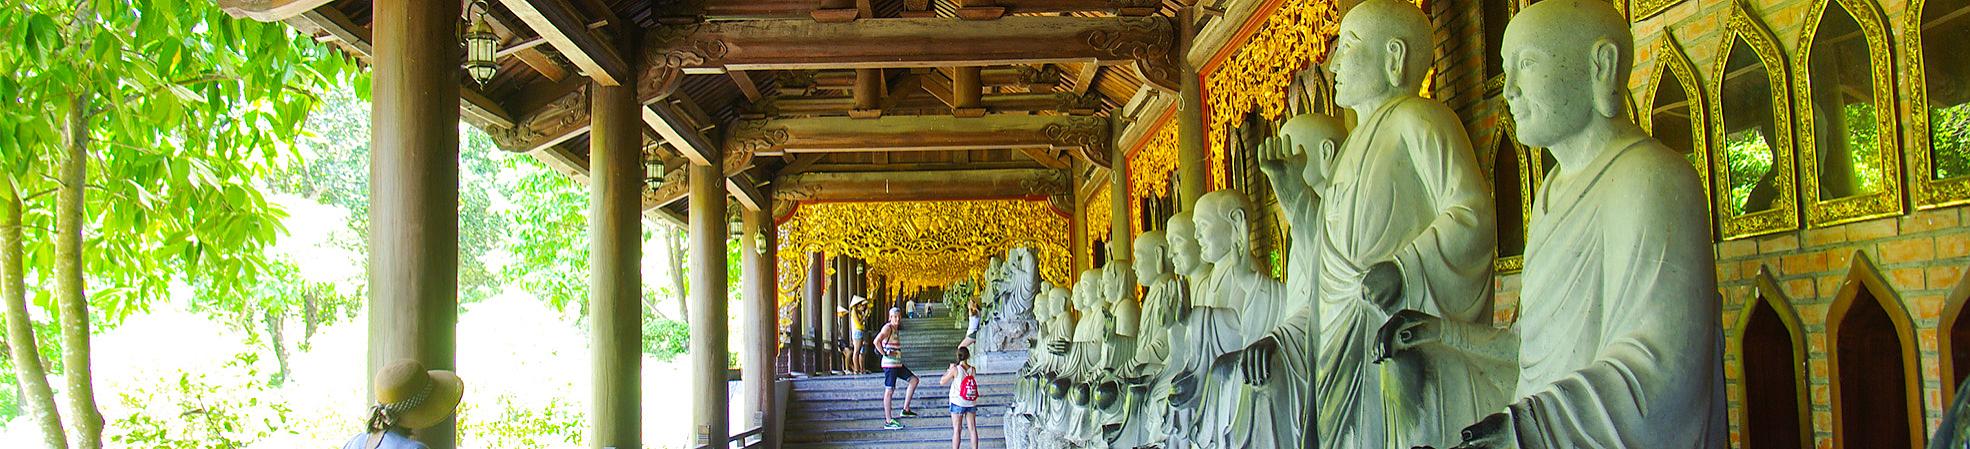 10 Best Vietnam's Temples and Pagodas to Visit